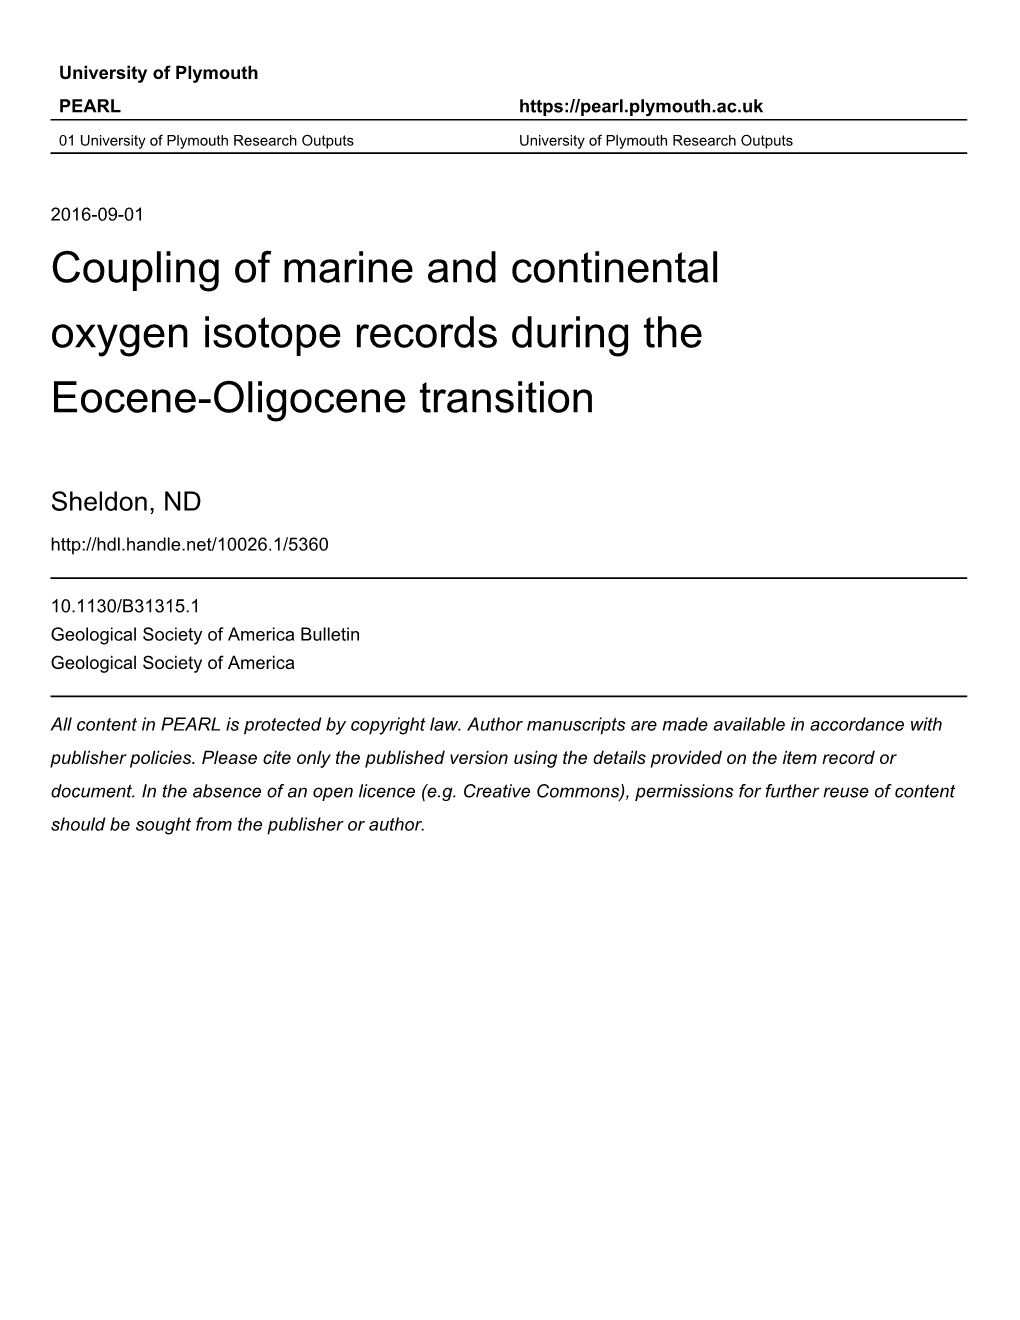 Coupling of Marine and Continental Oxygen Isotope Records During the Eocene-Oligocene Transition